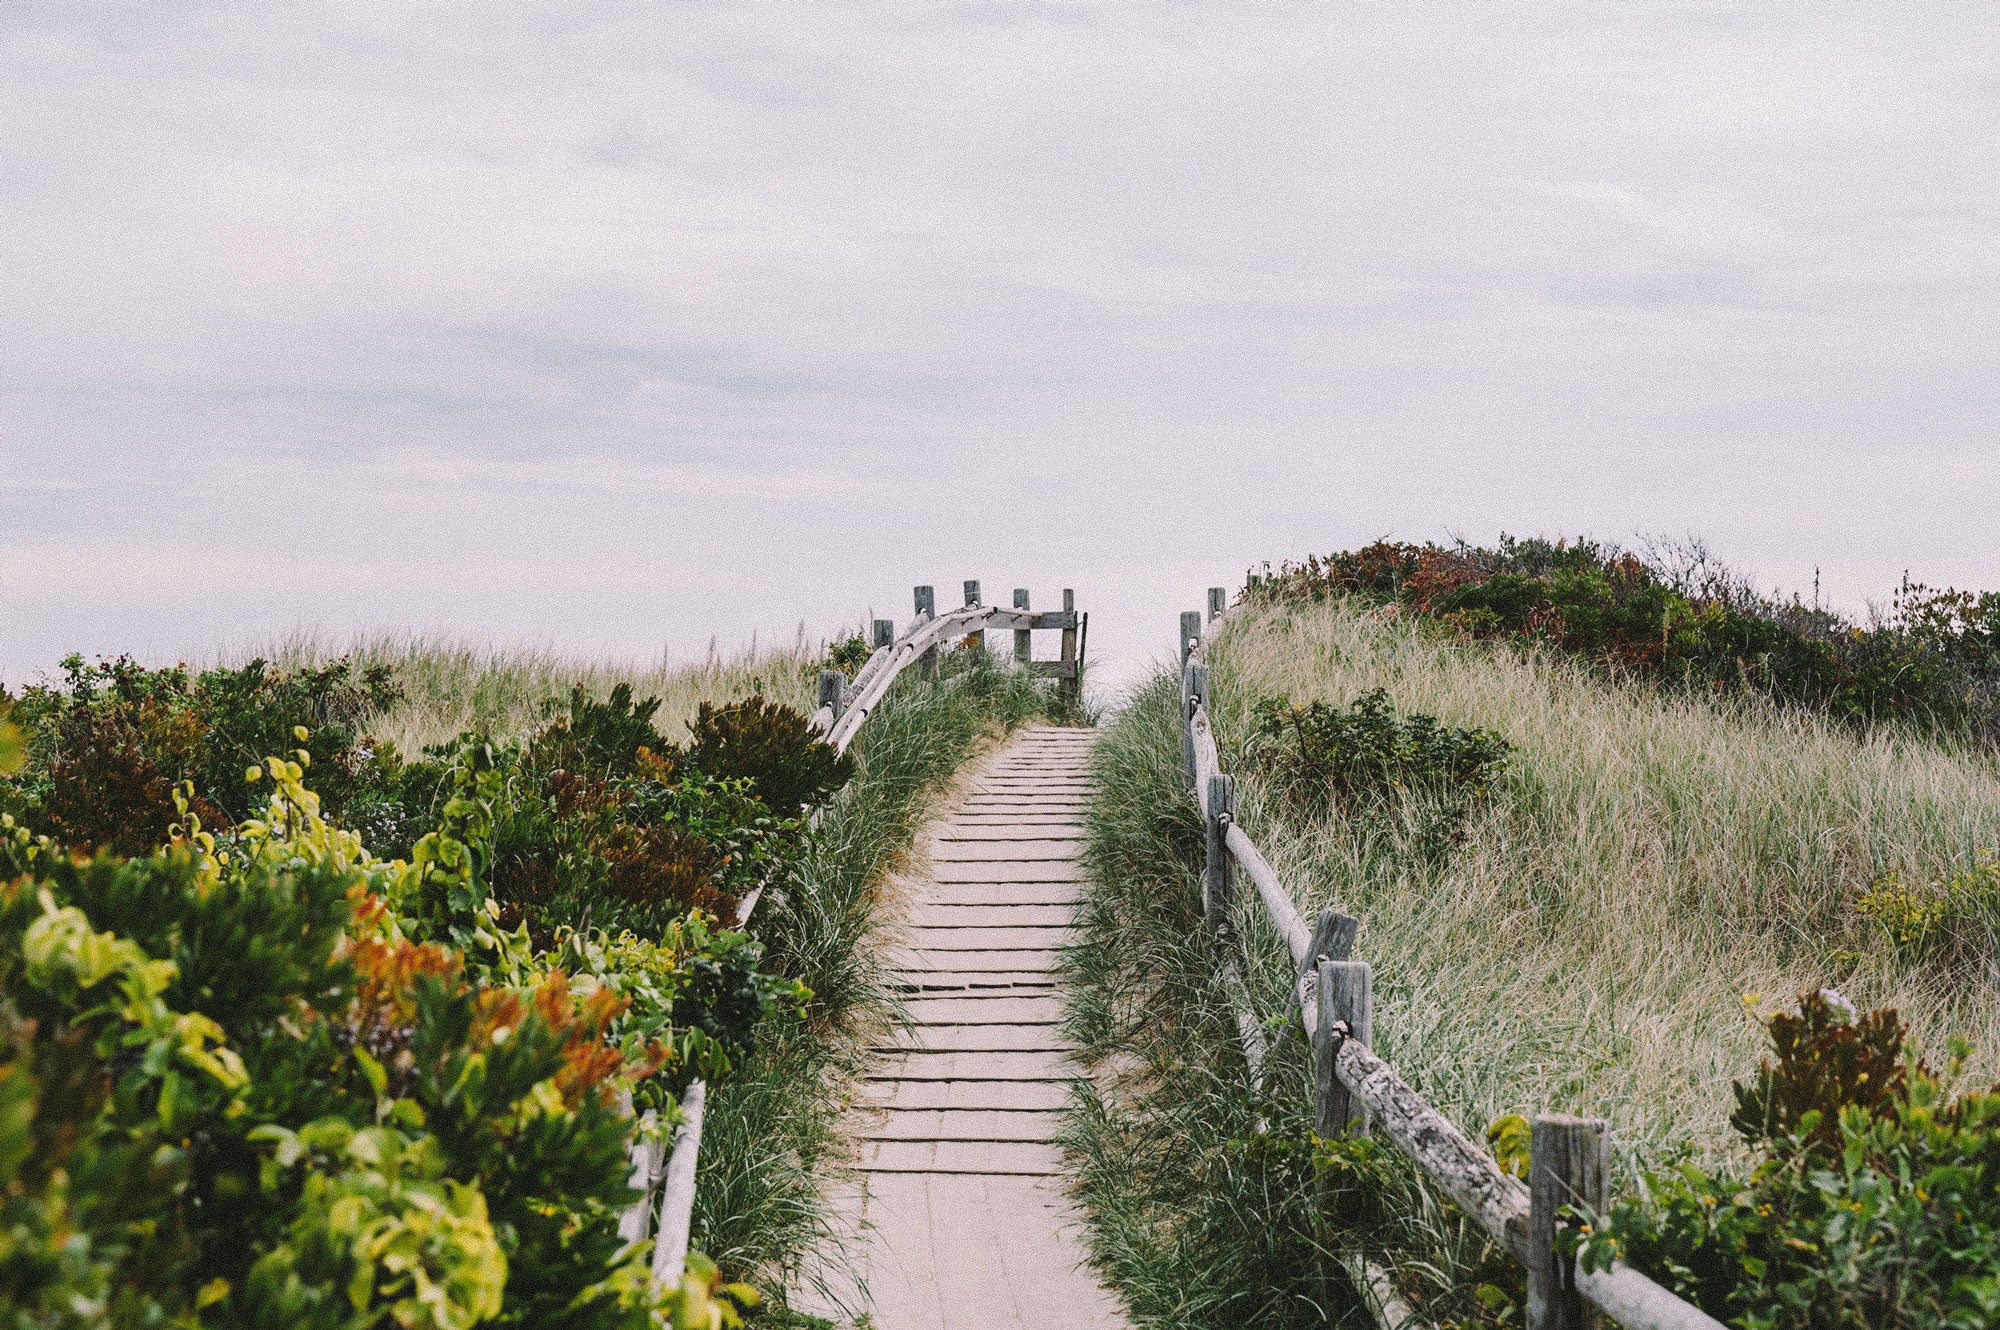 Beach path in New England. Photographed by Kristen M. Brown of Samba to the Sea.